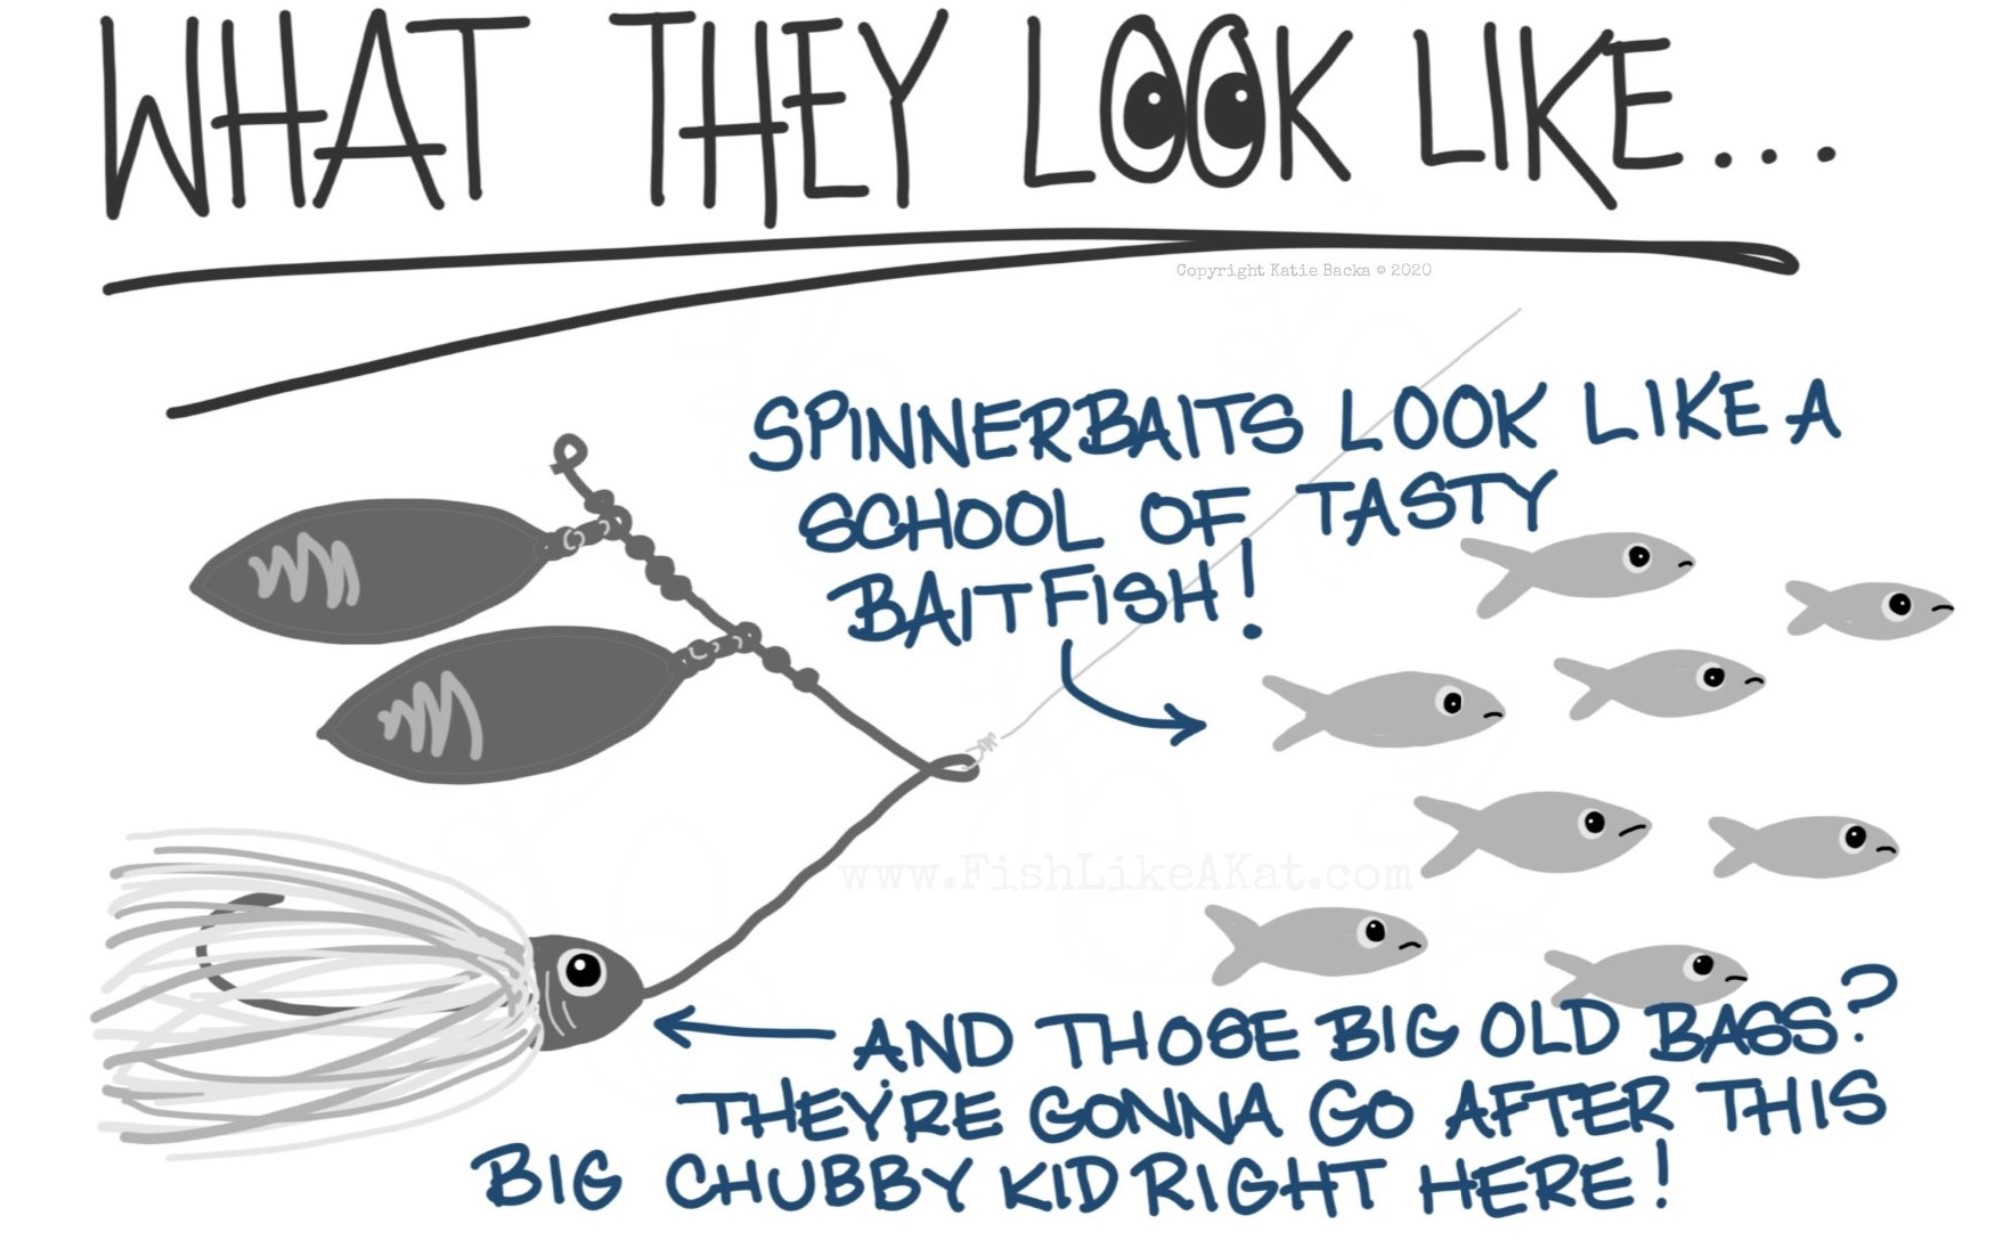 text: What they look like. Illustration of a spinnerbait in a school of baitfish